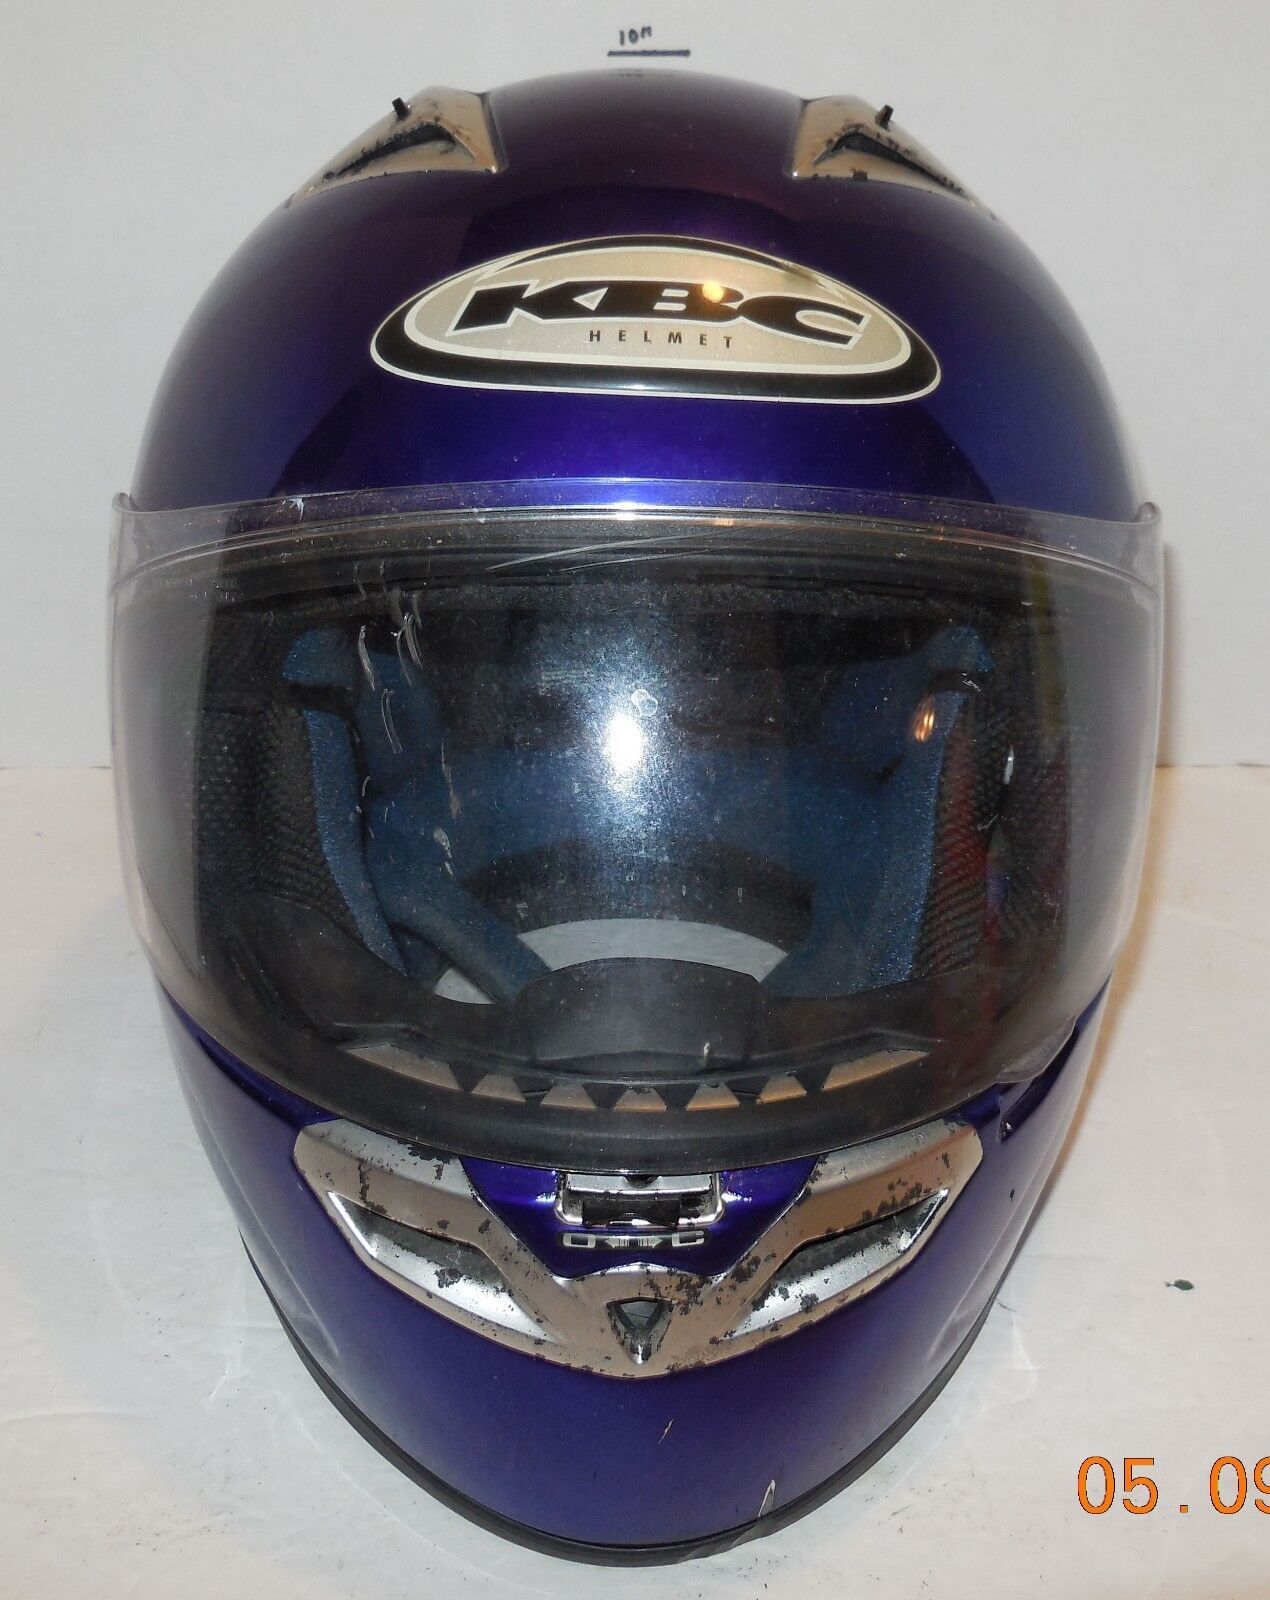 Primary image for KBC VR2  Motorcycle Helmet Blue Sz XL (61-62cm) Snell DOT Approved